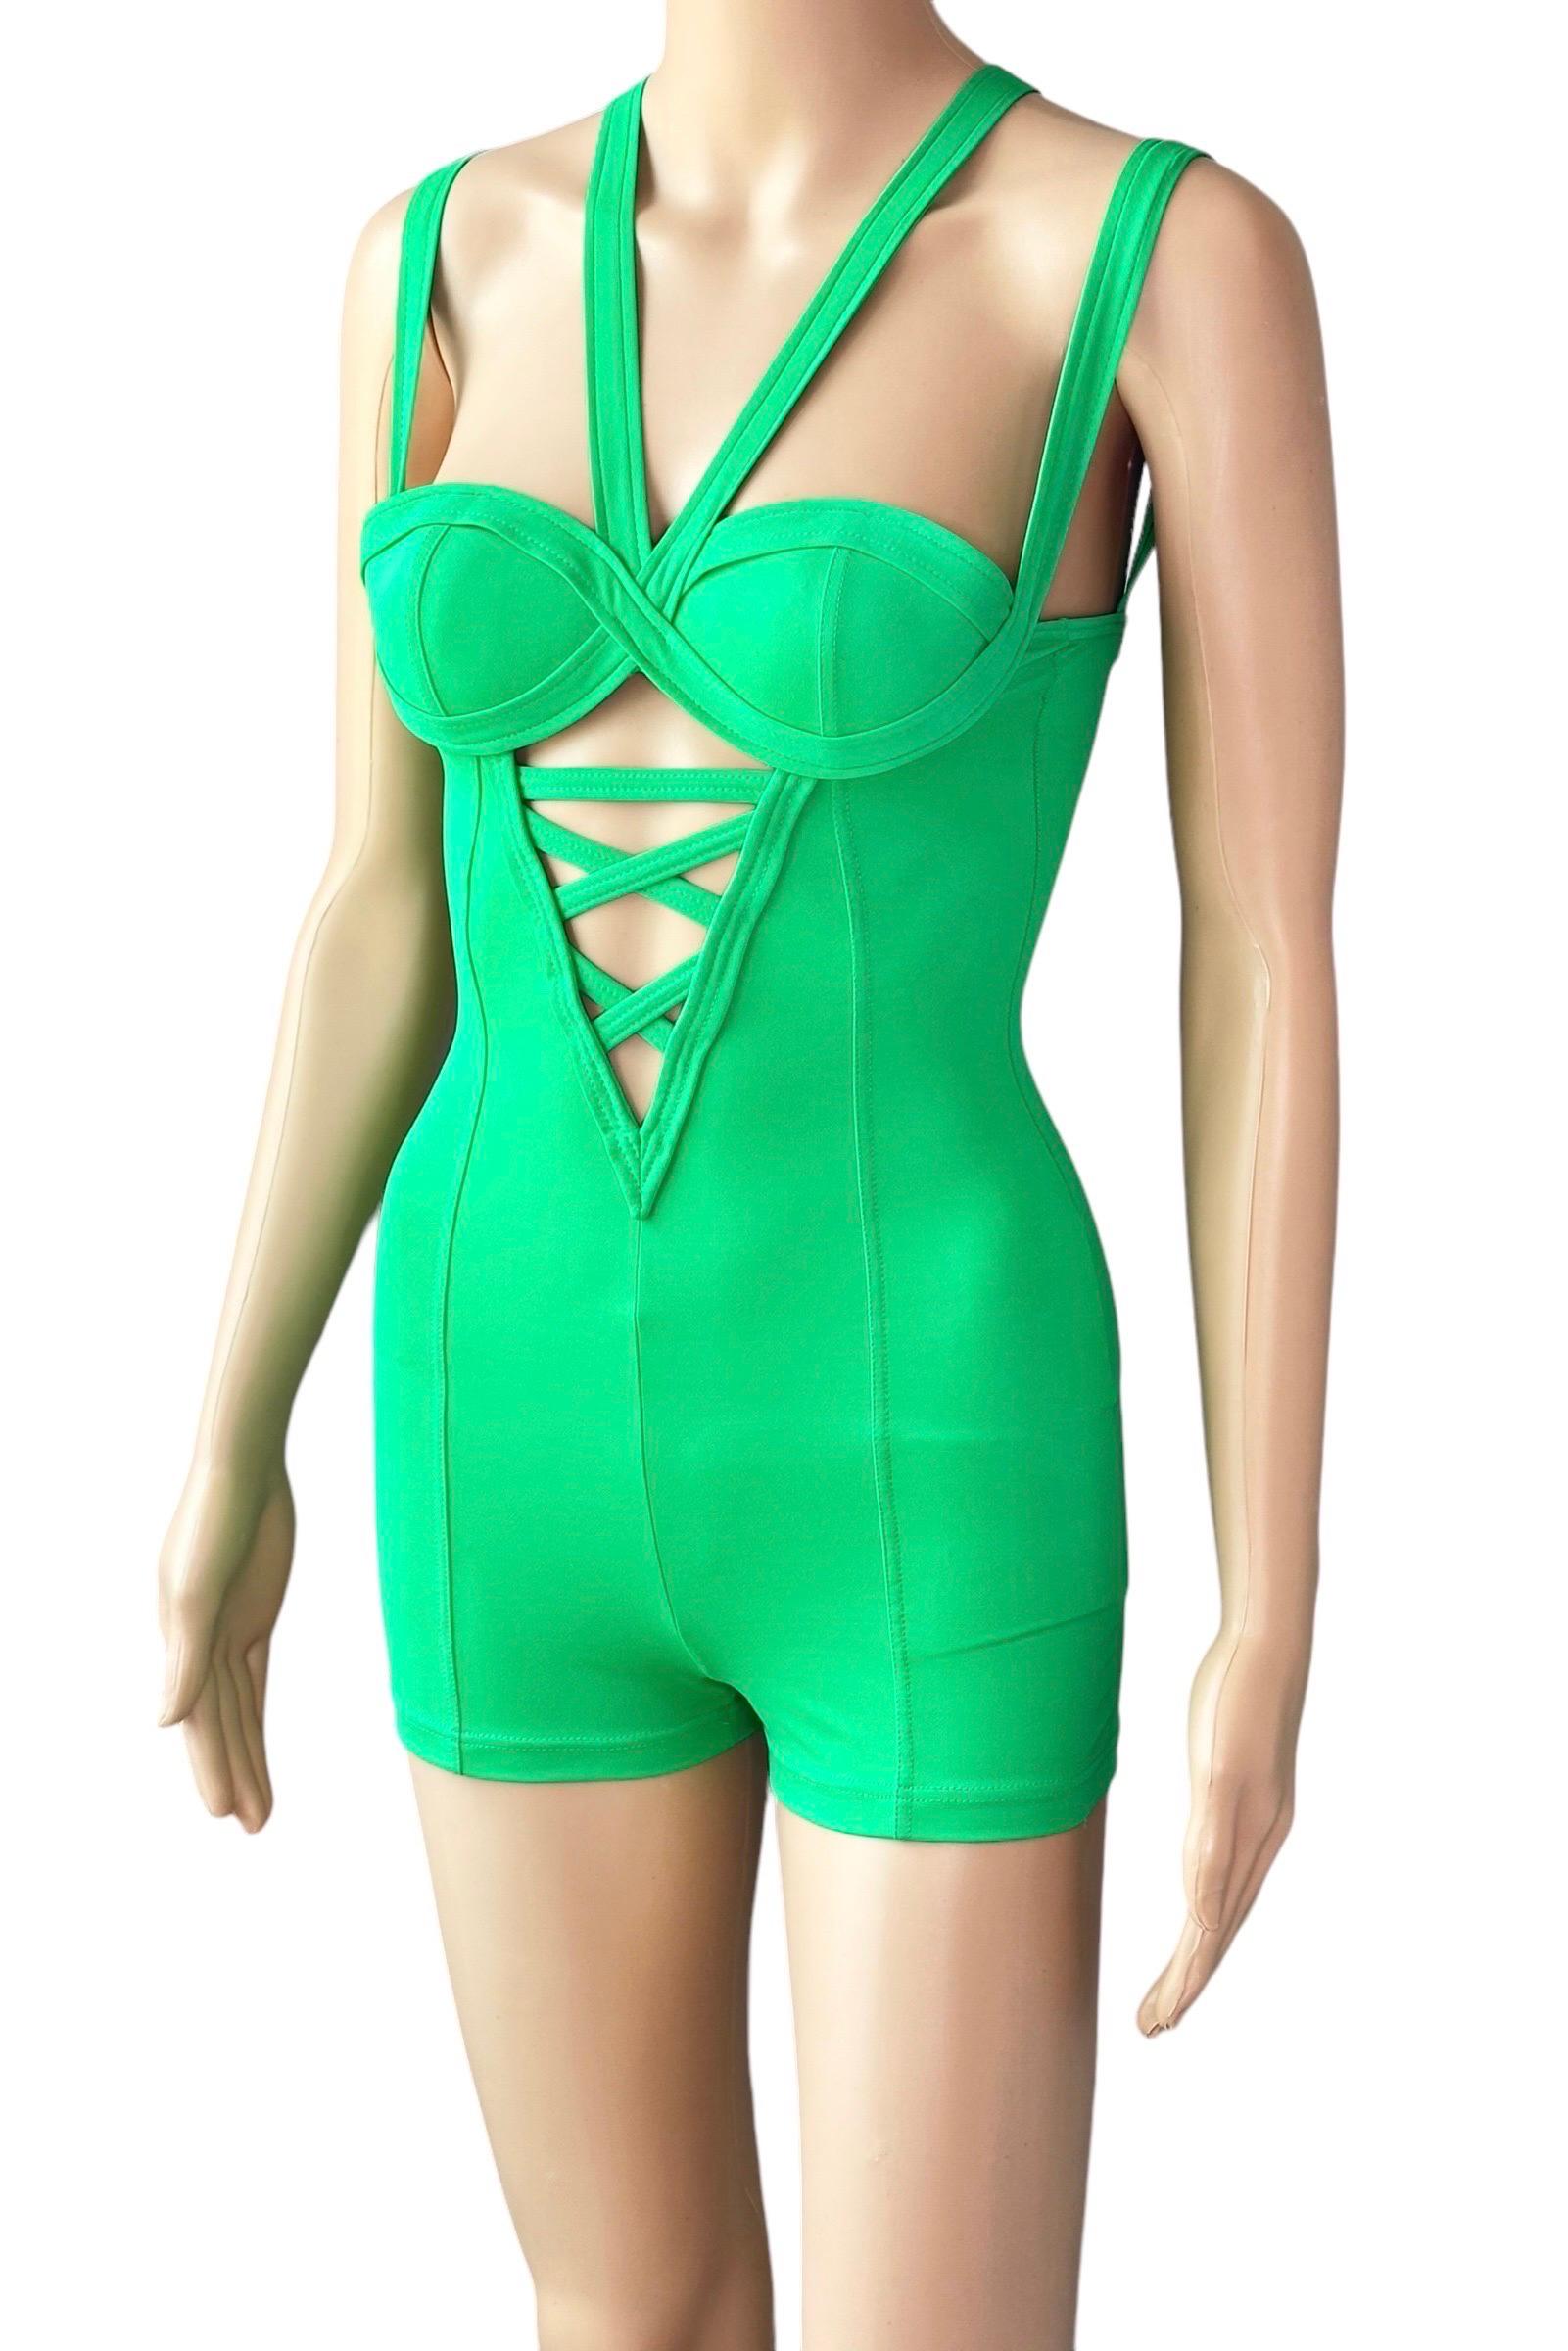 Gianni Versace S/S 1993 Mare Vintage Bustier Cutout Green One-Piece Romper Jumpsuit

Versace Mare green jumpsuit featuring bustier cups with strappy chest detailing and criss cross back.

Condition: Good Vintage Condition. Some loose and broken